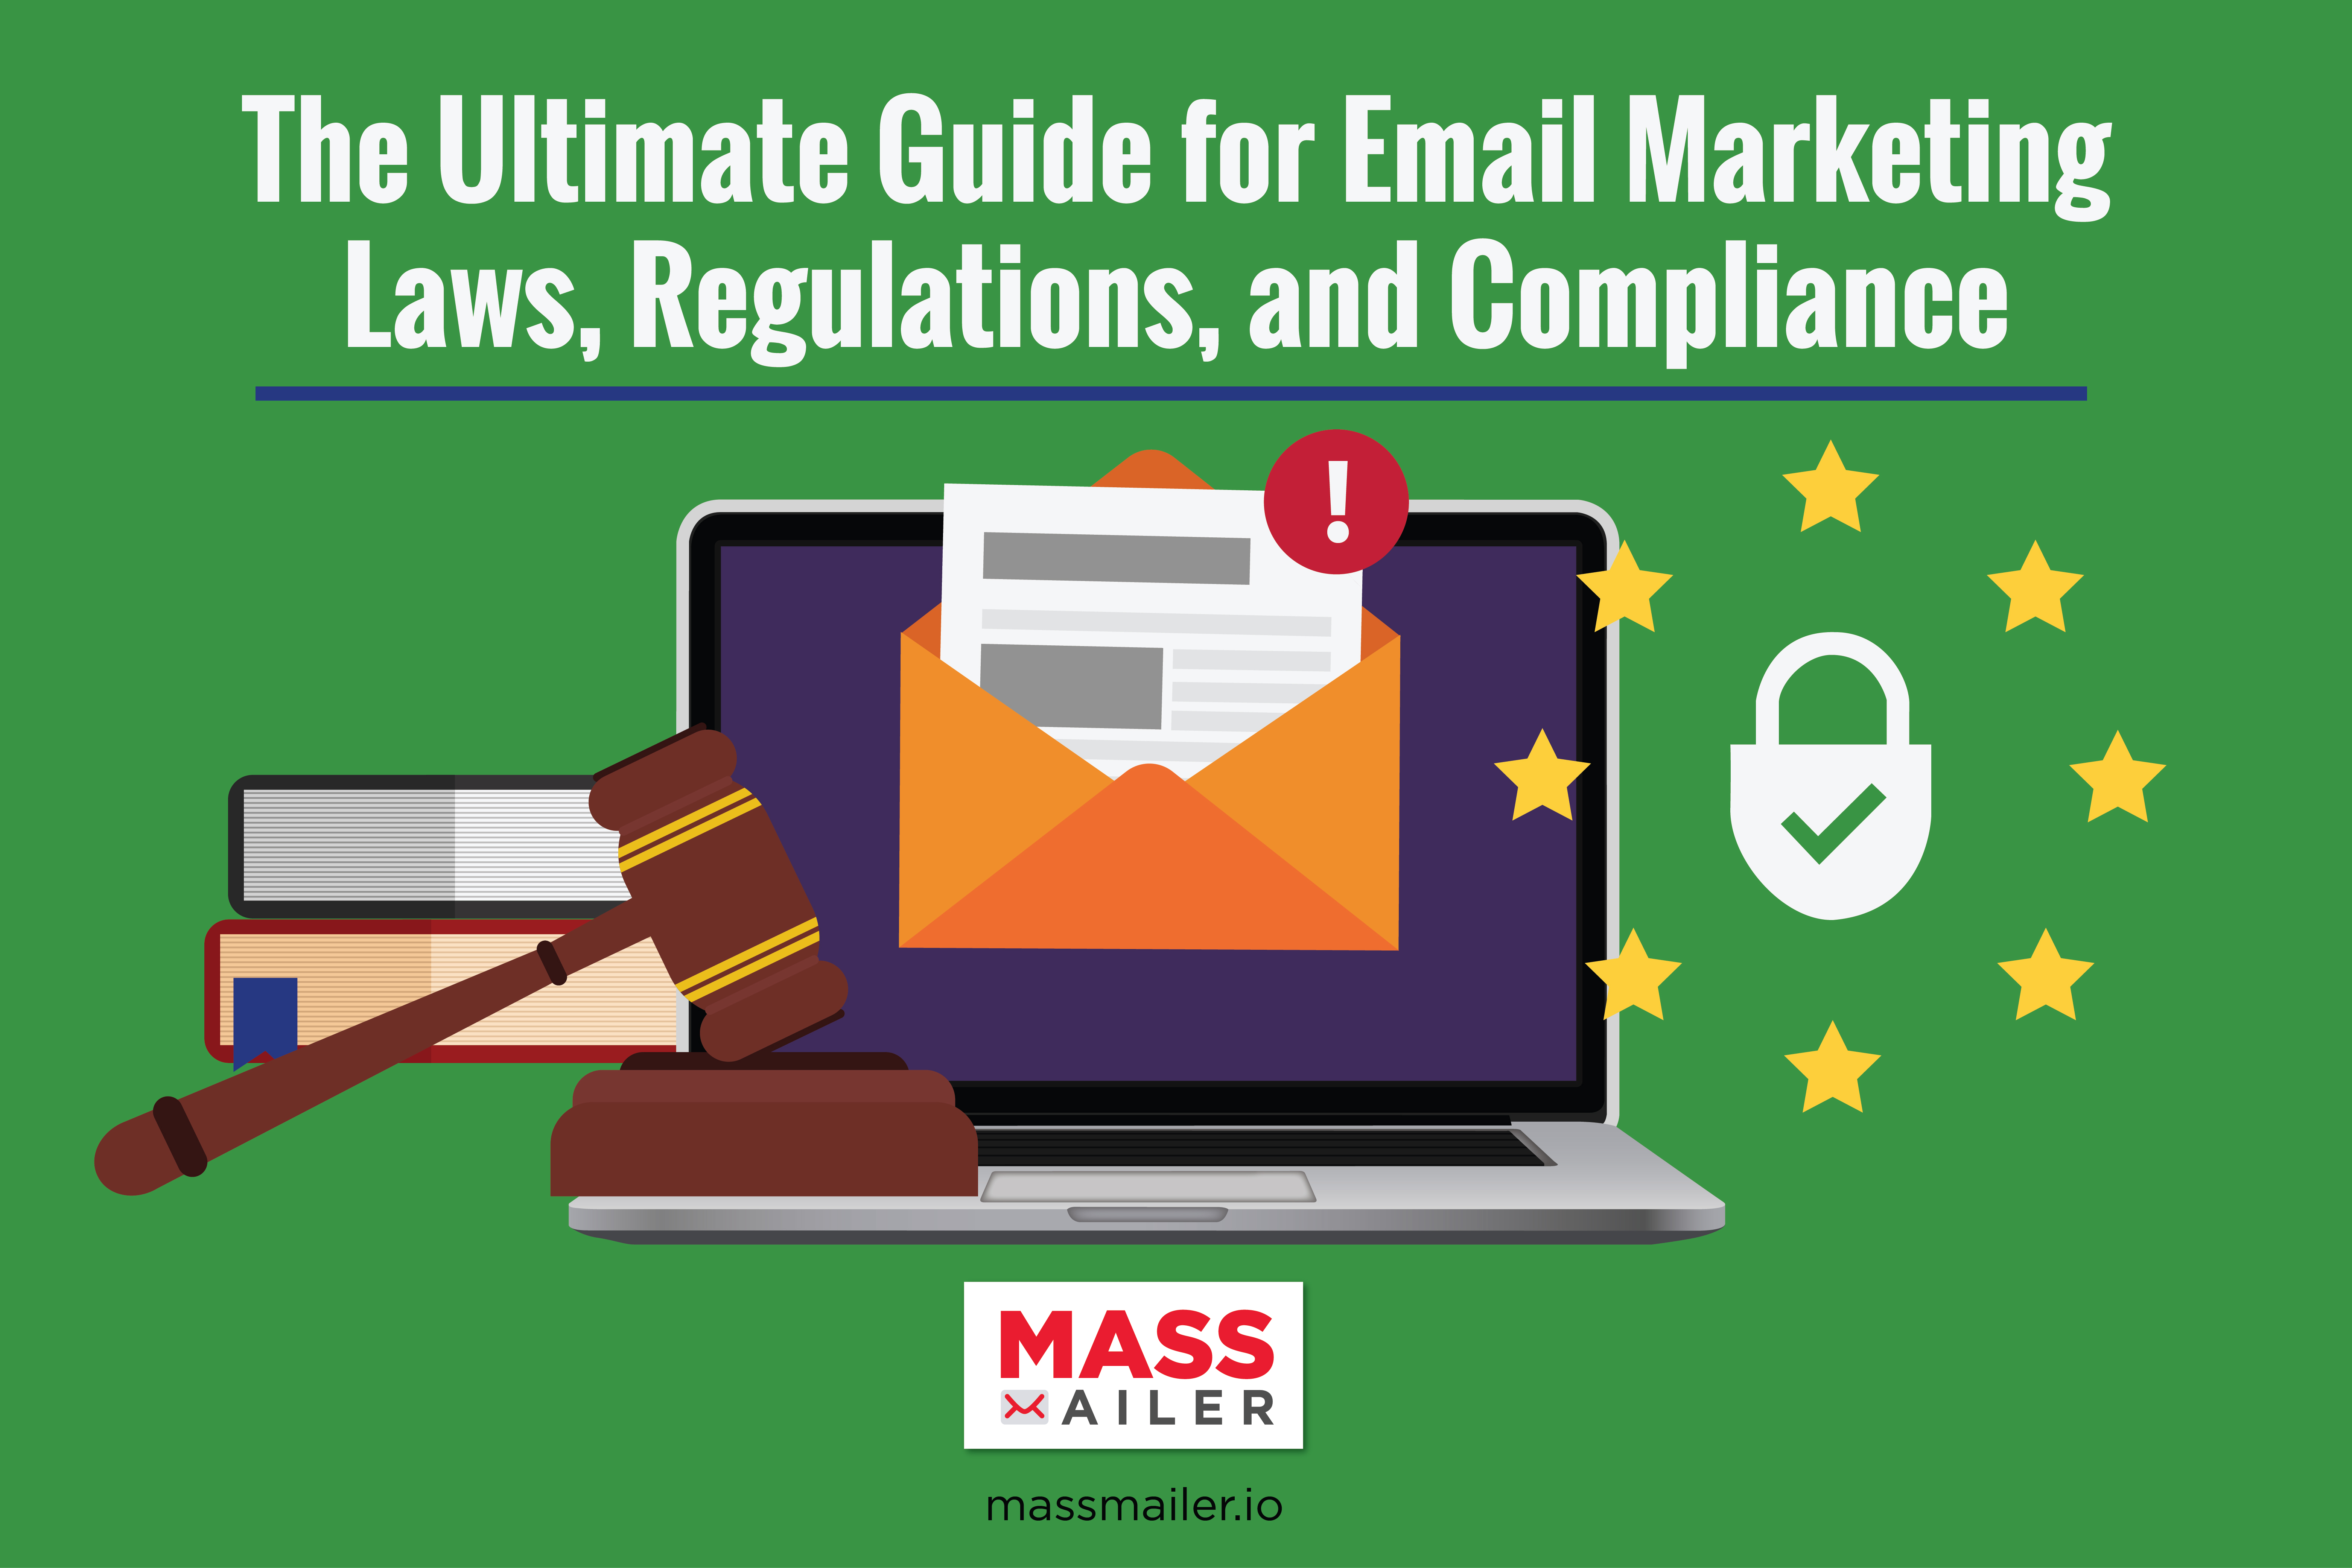 The Ultimate Guide for Email Marketing Laws, Regulations and Compliance